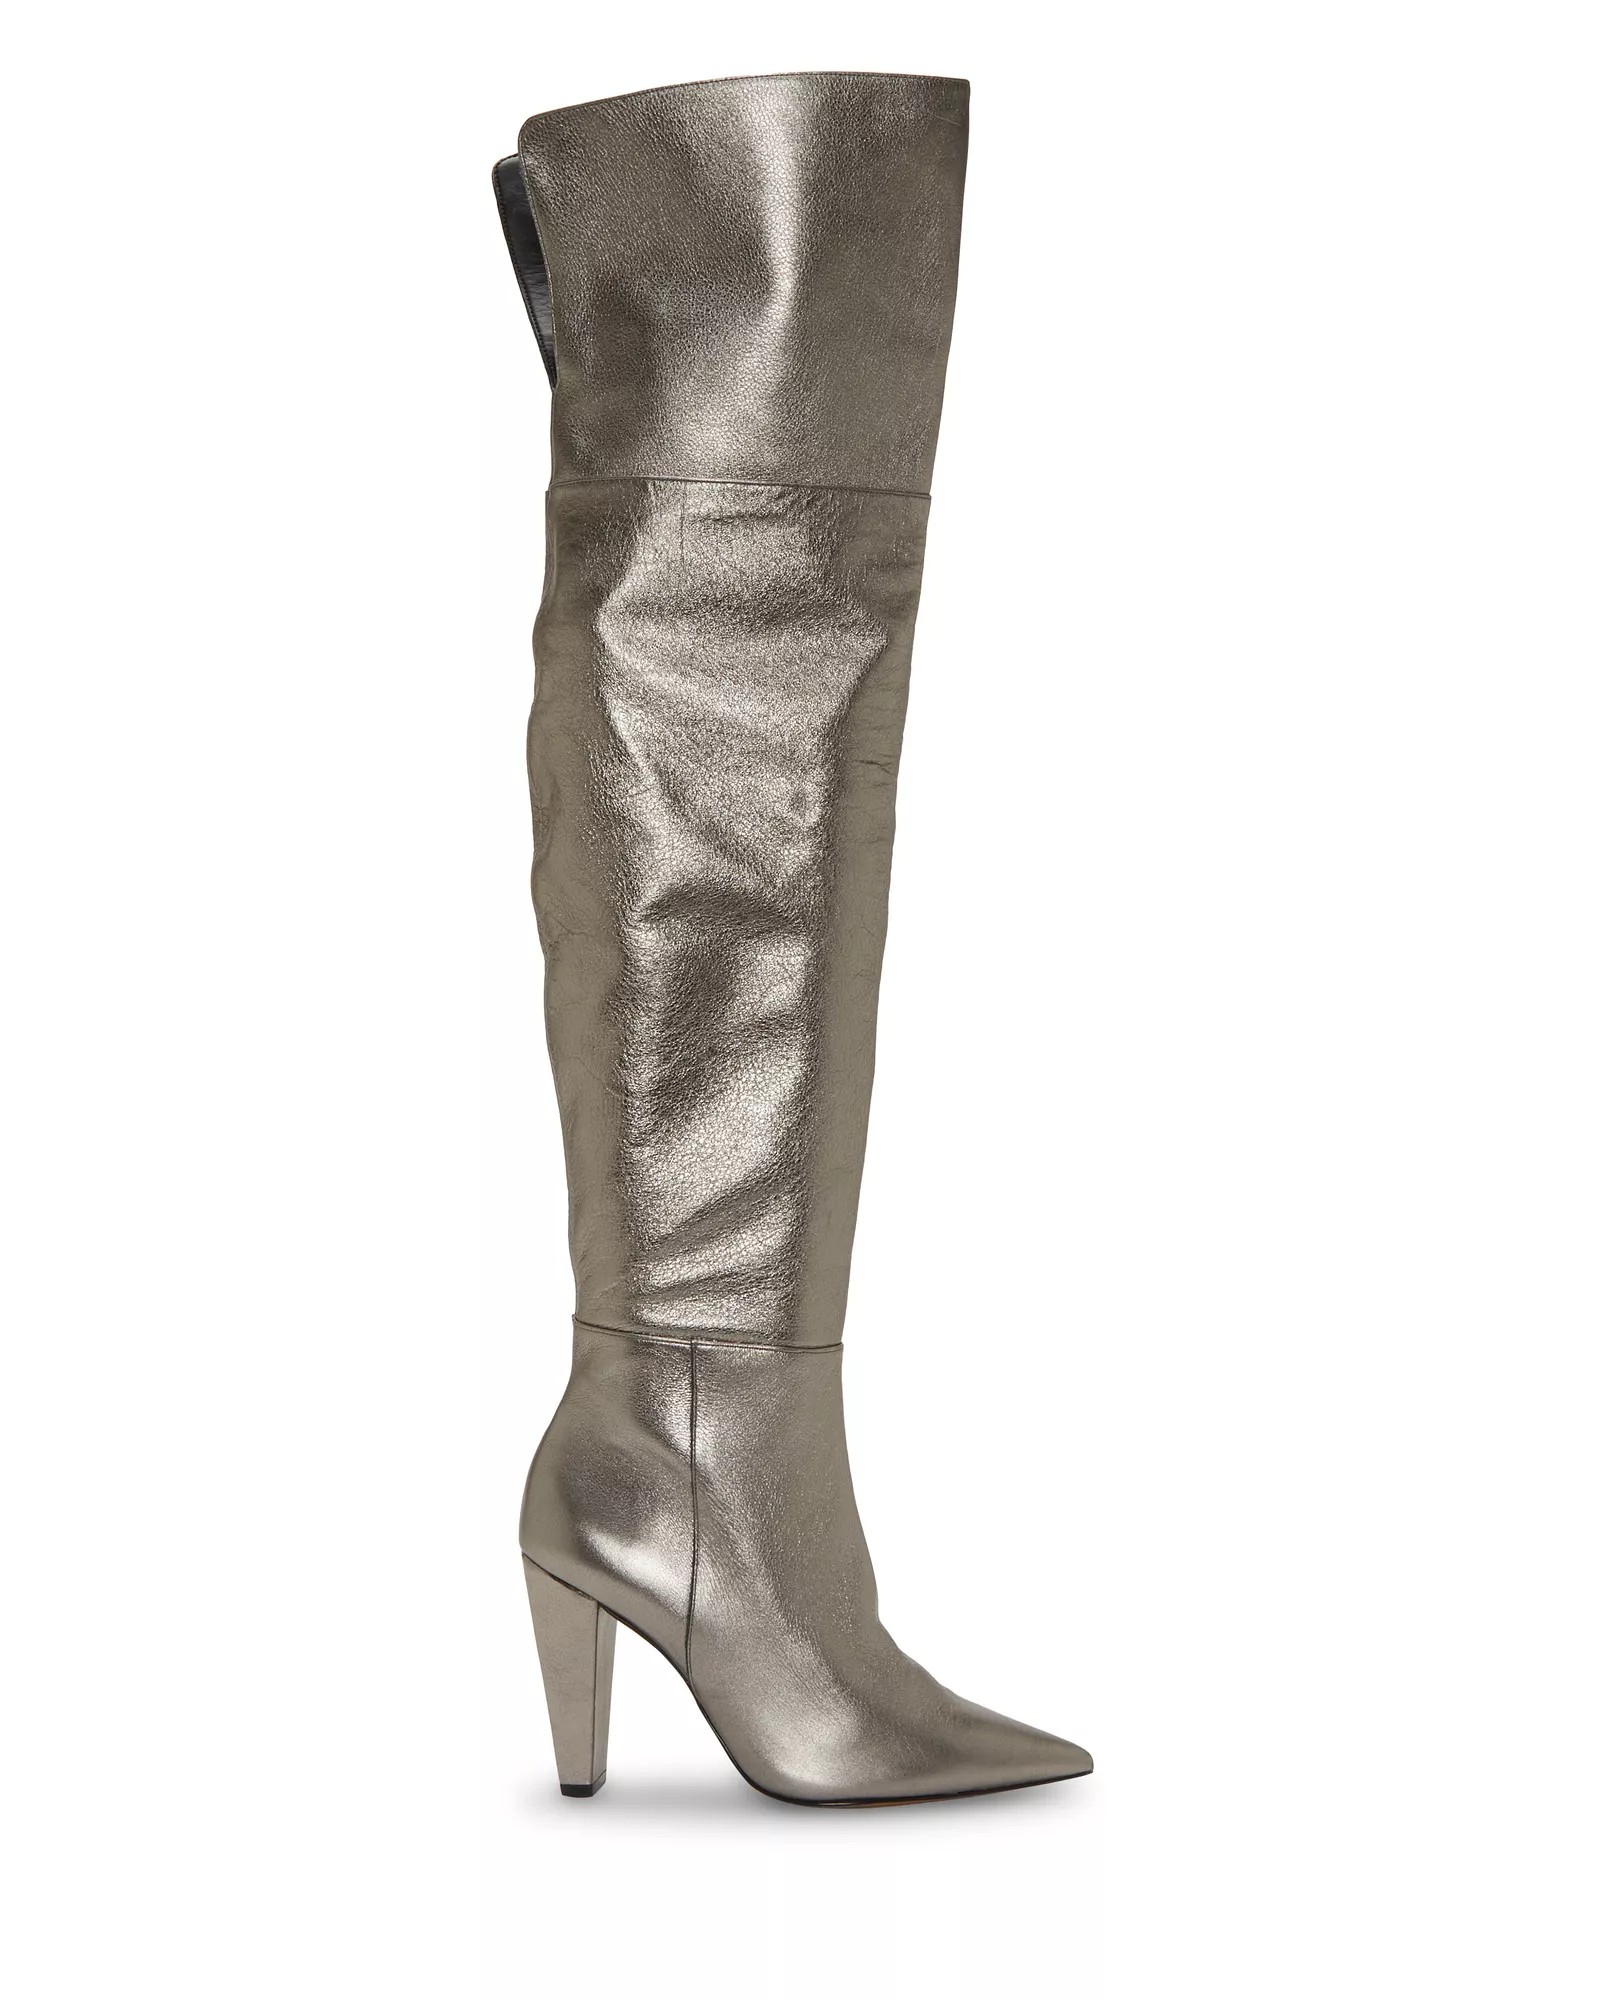 Vince Camuto Minnada Over The Knee Boot | Vince Camuto